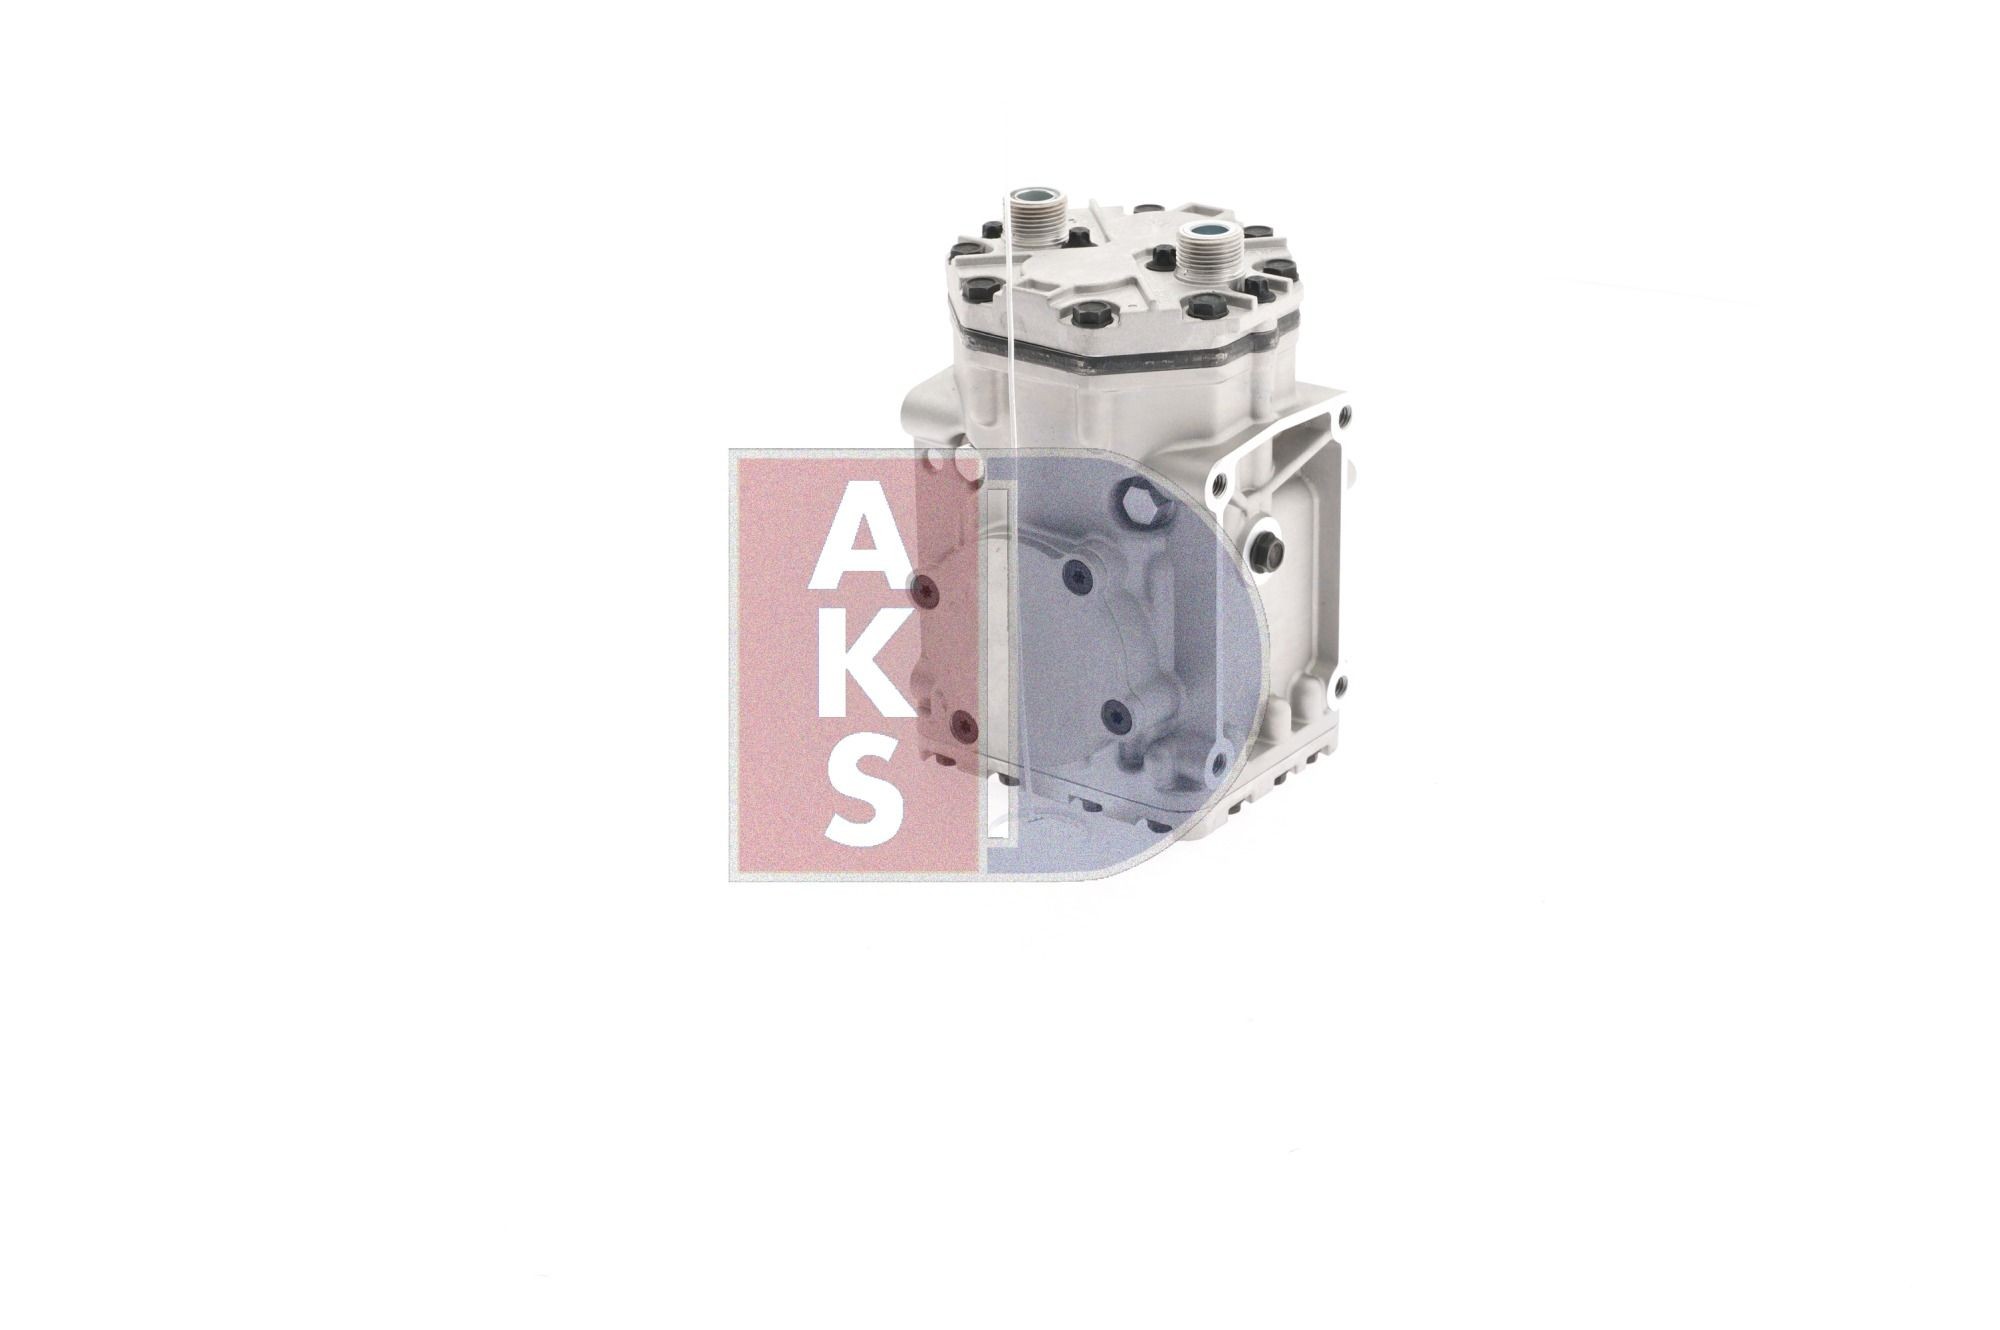 Air conditioning compressor 850422N from AKS DASIS